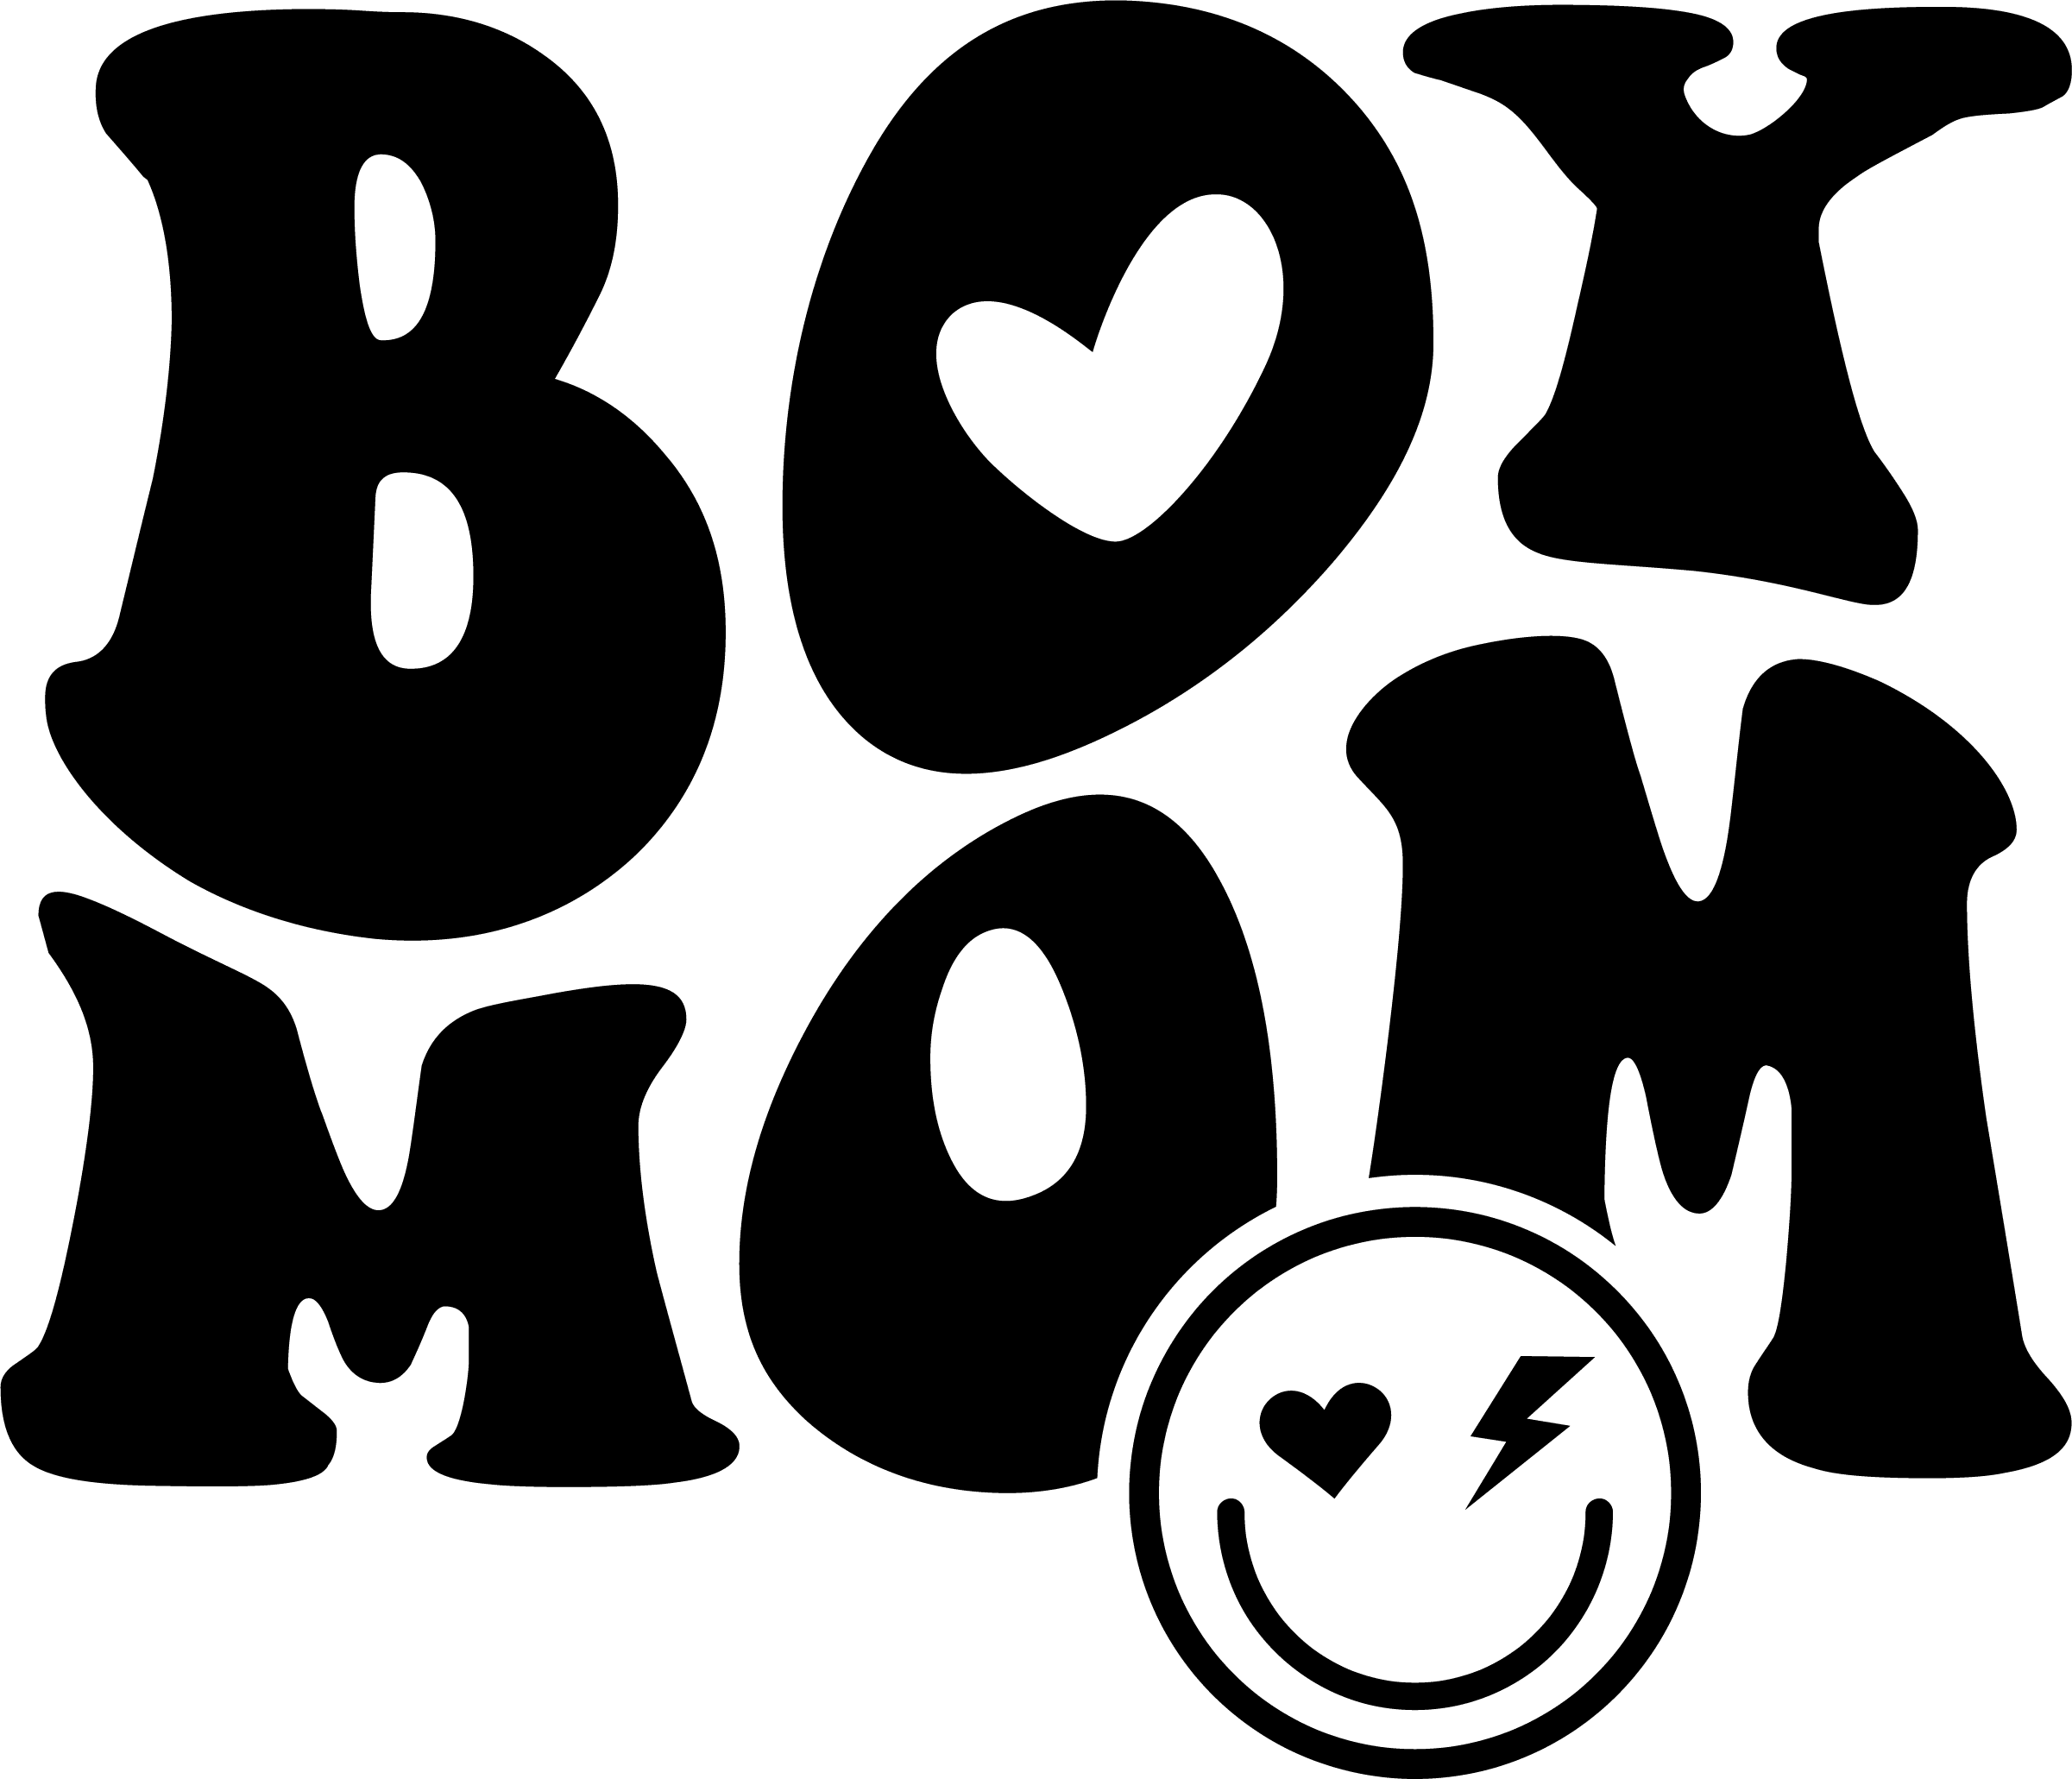 Boy Mom Mother's Day Graphic Tee - VirtuousWares:Global